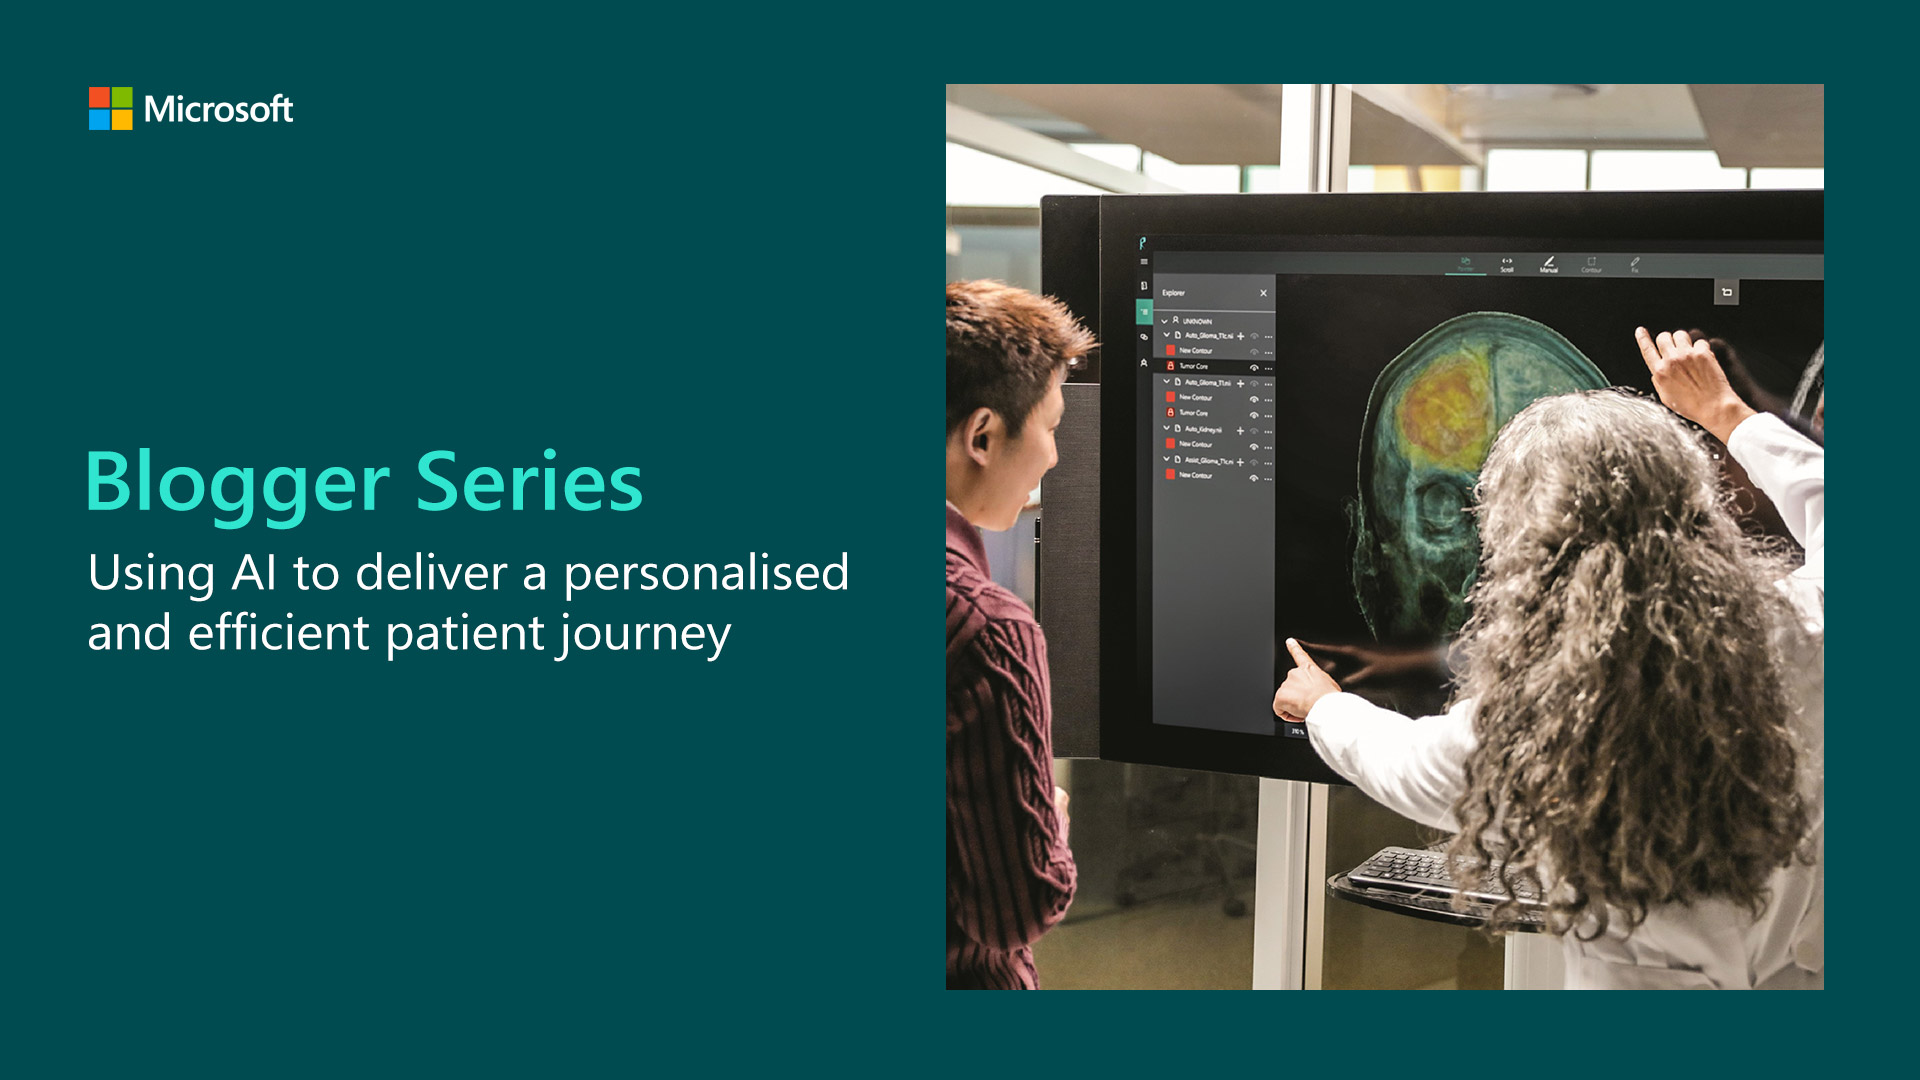 Blogger Series banner showing AI being used in the healthcare setting